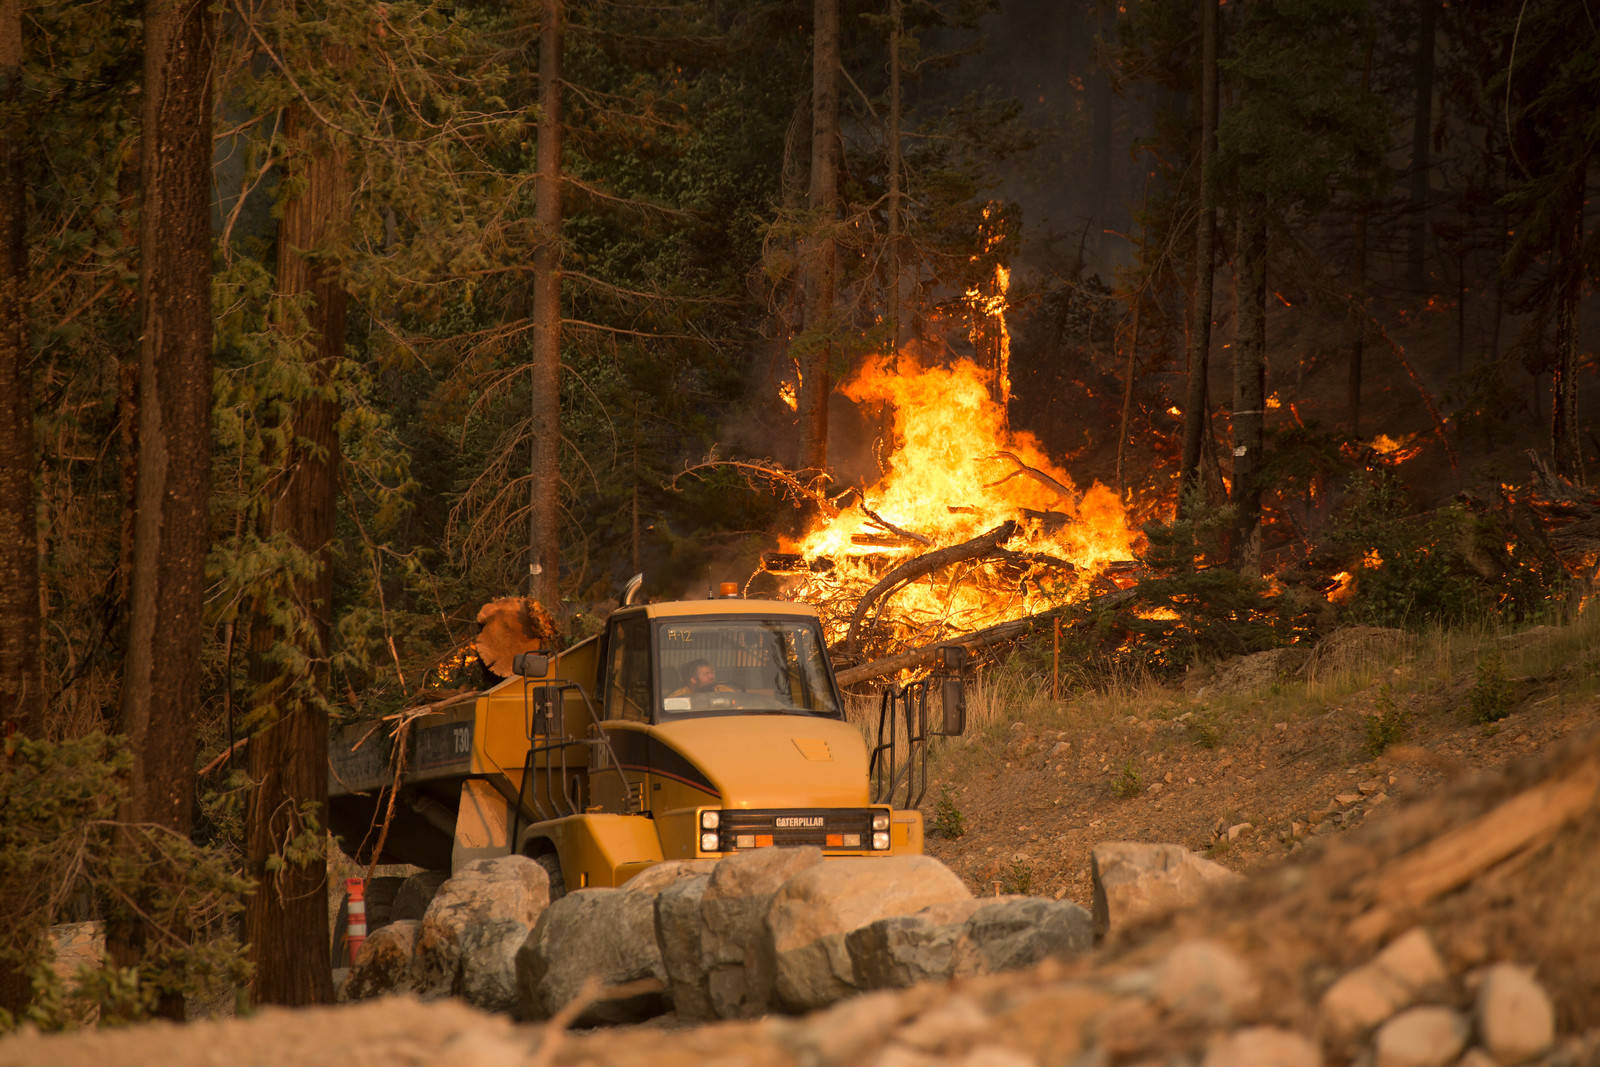 The 2015 Wolverine Fire in the Okanogan-Wenatchee National Forest near Lake Chelan. Photo courtesy of Washington Department of Natural Resources/Kari Greer